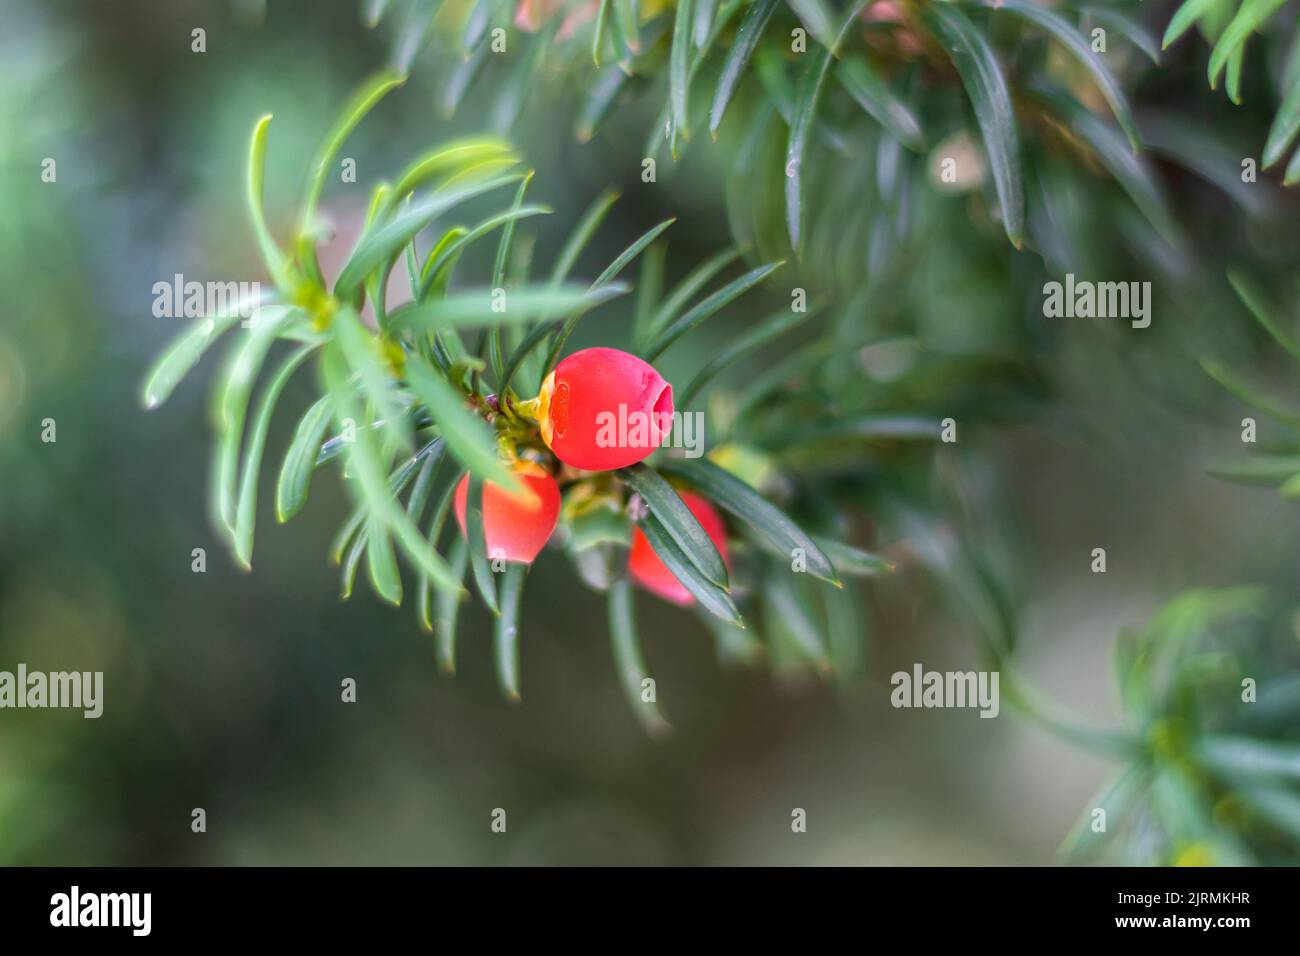 Taxus baccata, red cones of yew with green foliage Stock Photo